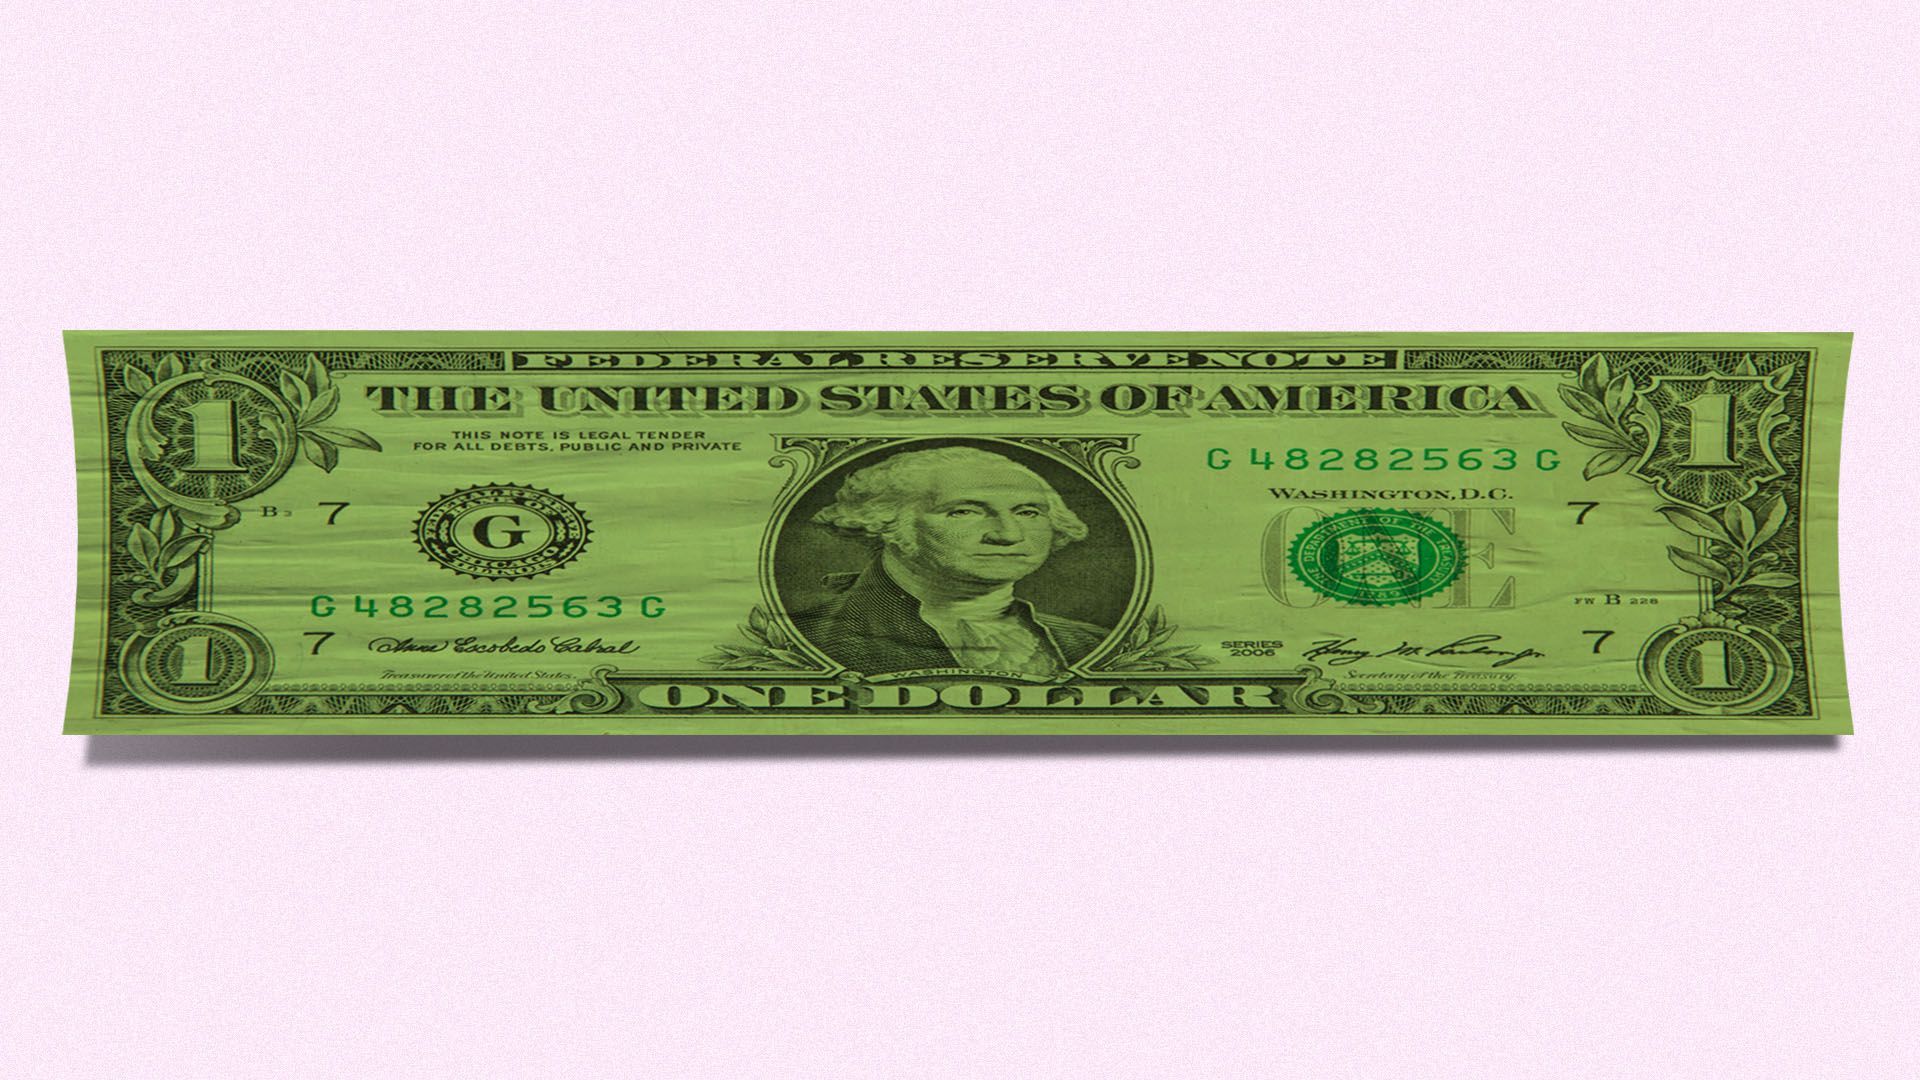 Illustration of a stretched out dollar bill